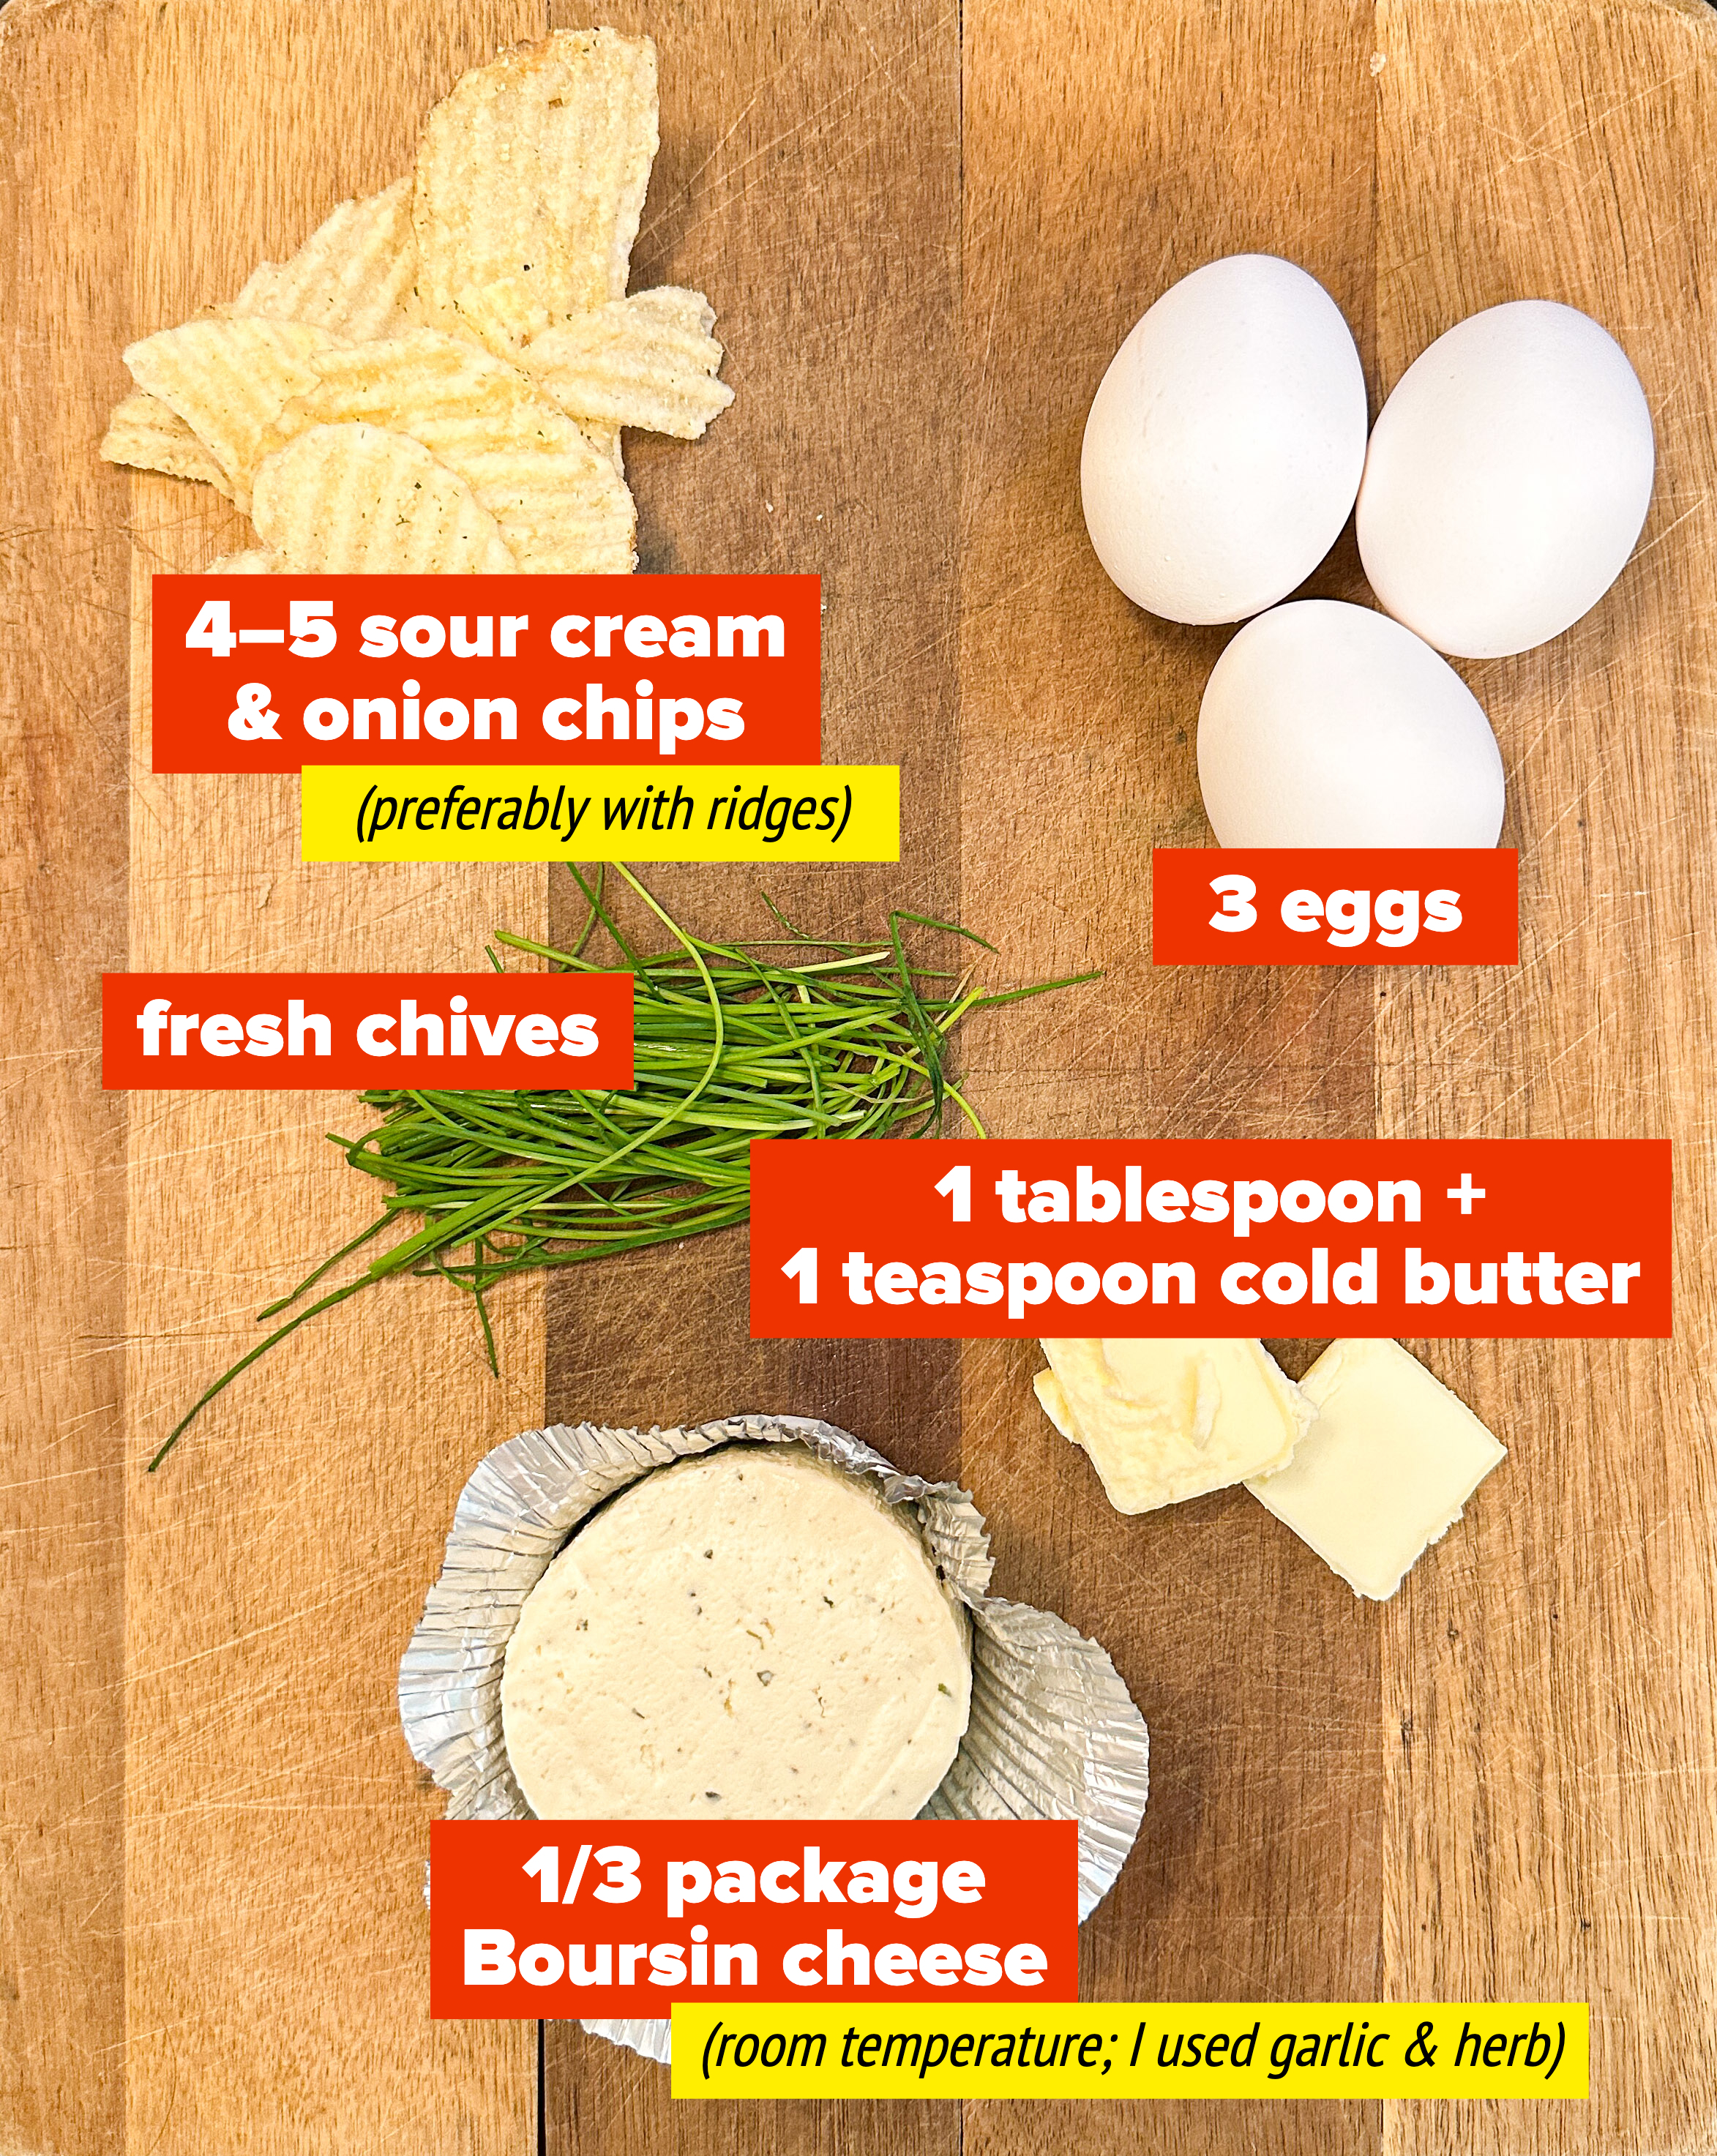 4-5 sour cream and onion chips, 3 eggs, fresh chives, 1 tablespoon plus 1 teaspoon cold butter, and 1/3 package of room temperature boursin cheese